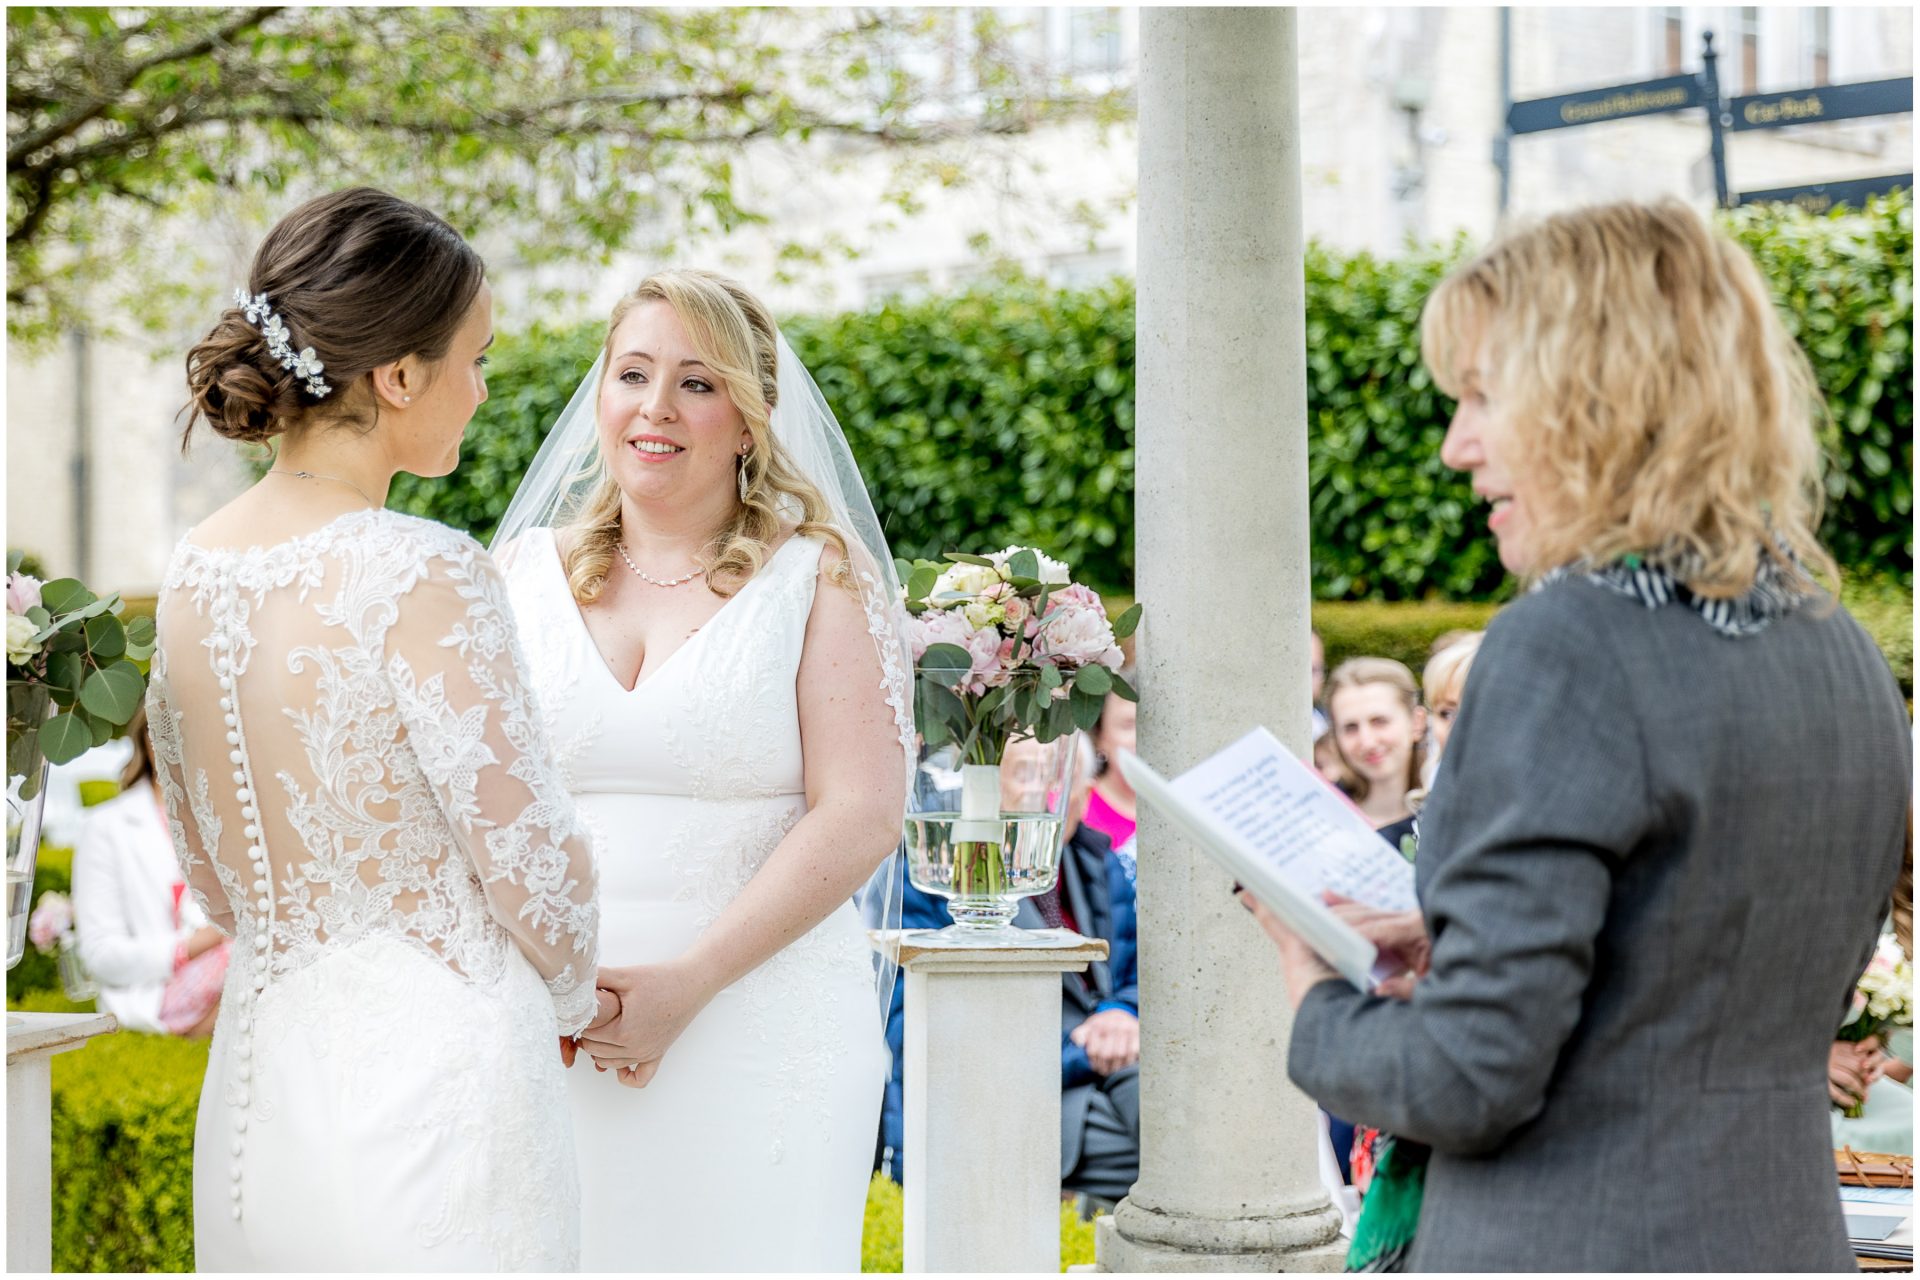 The two brides stand together at the start of the wedding ceremony